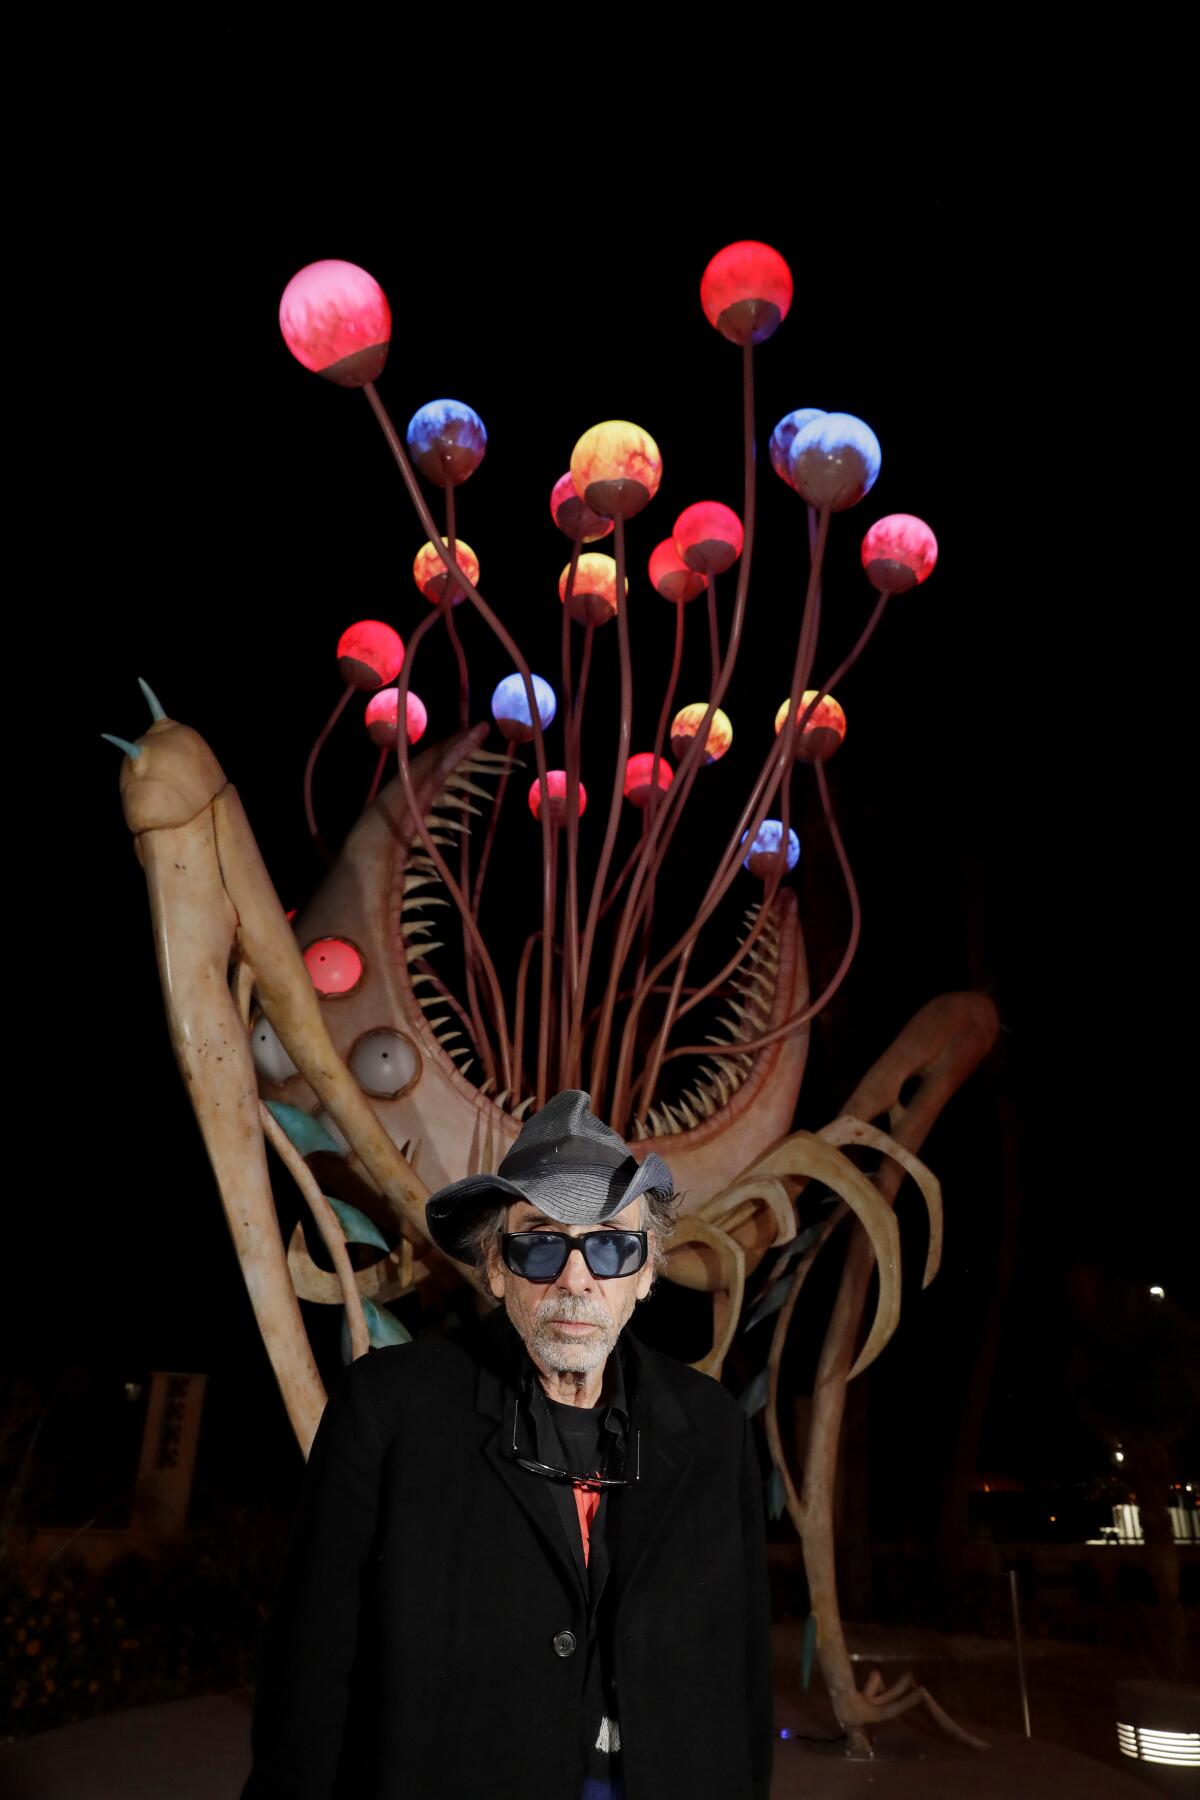 Tim Burton in front of "Orb Monster" at his "Lost Vegas" exhibit at the Neon Museum.